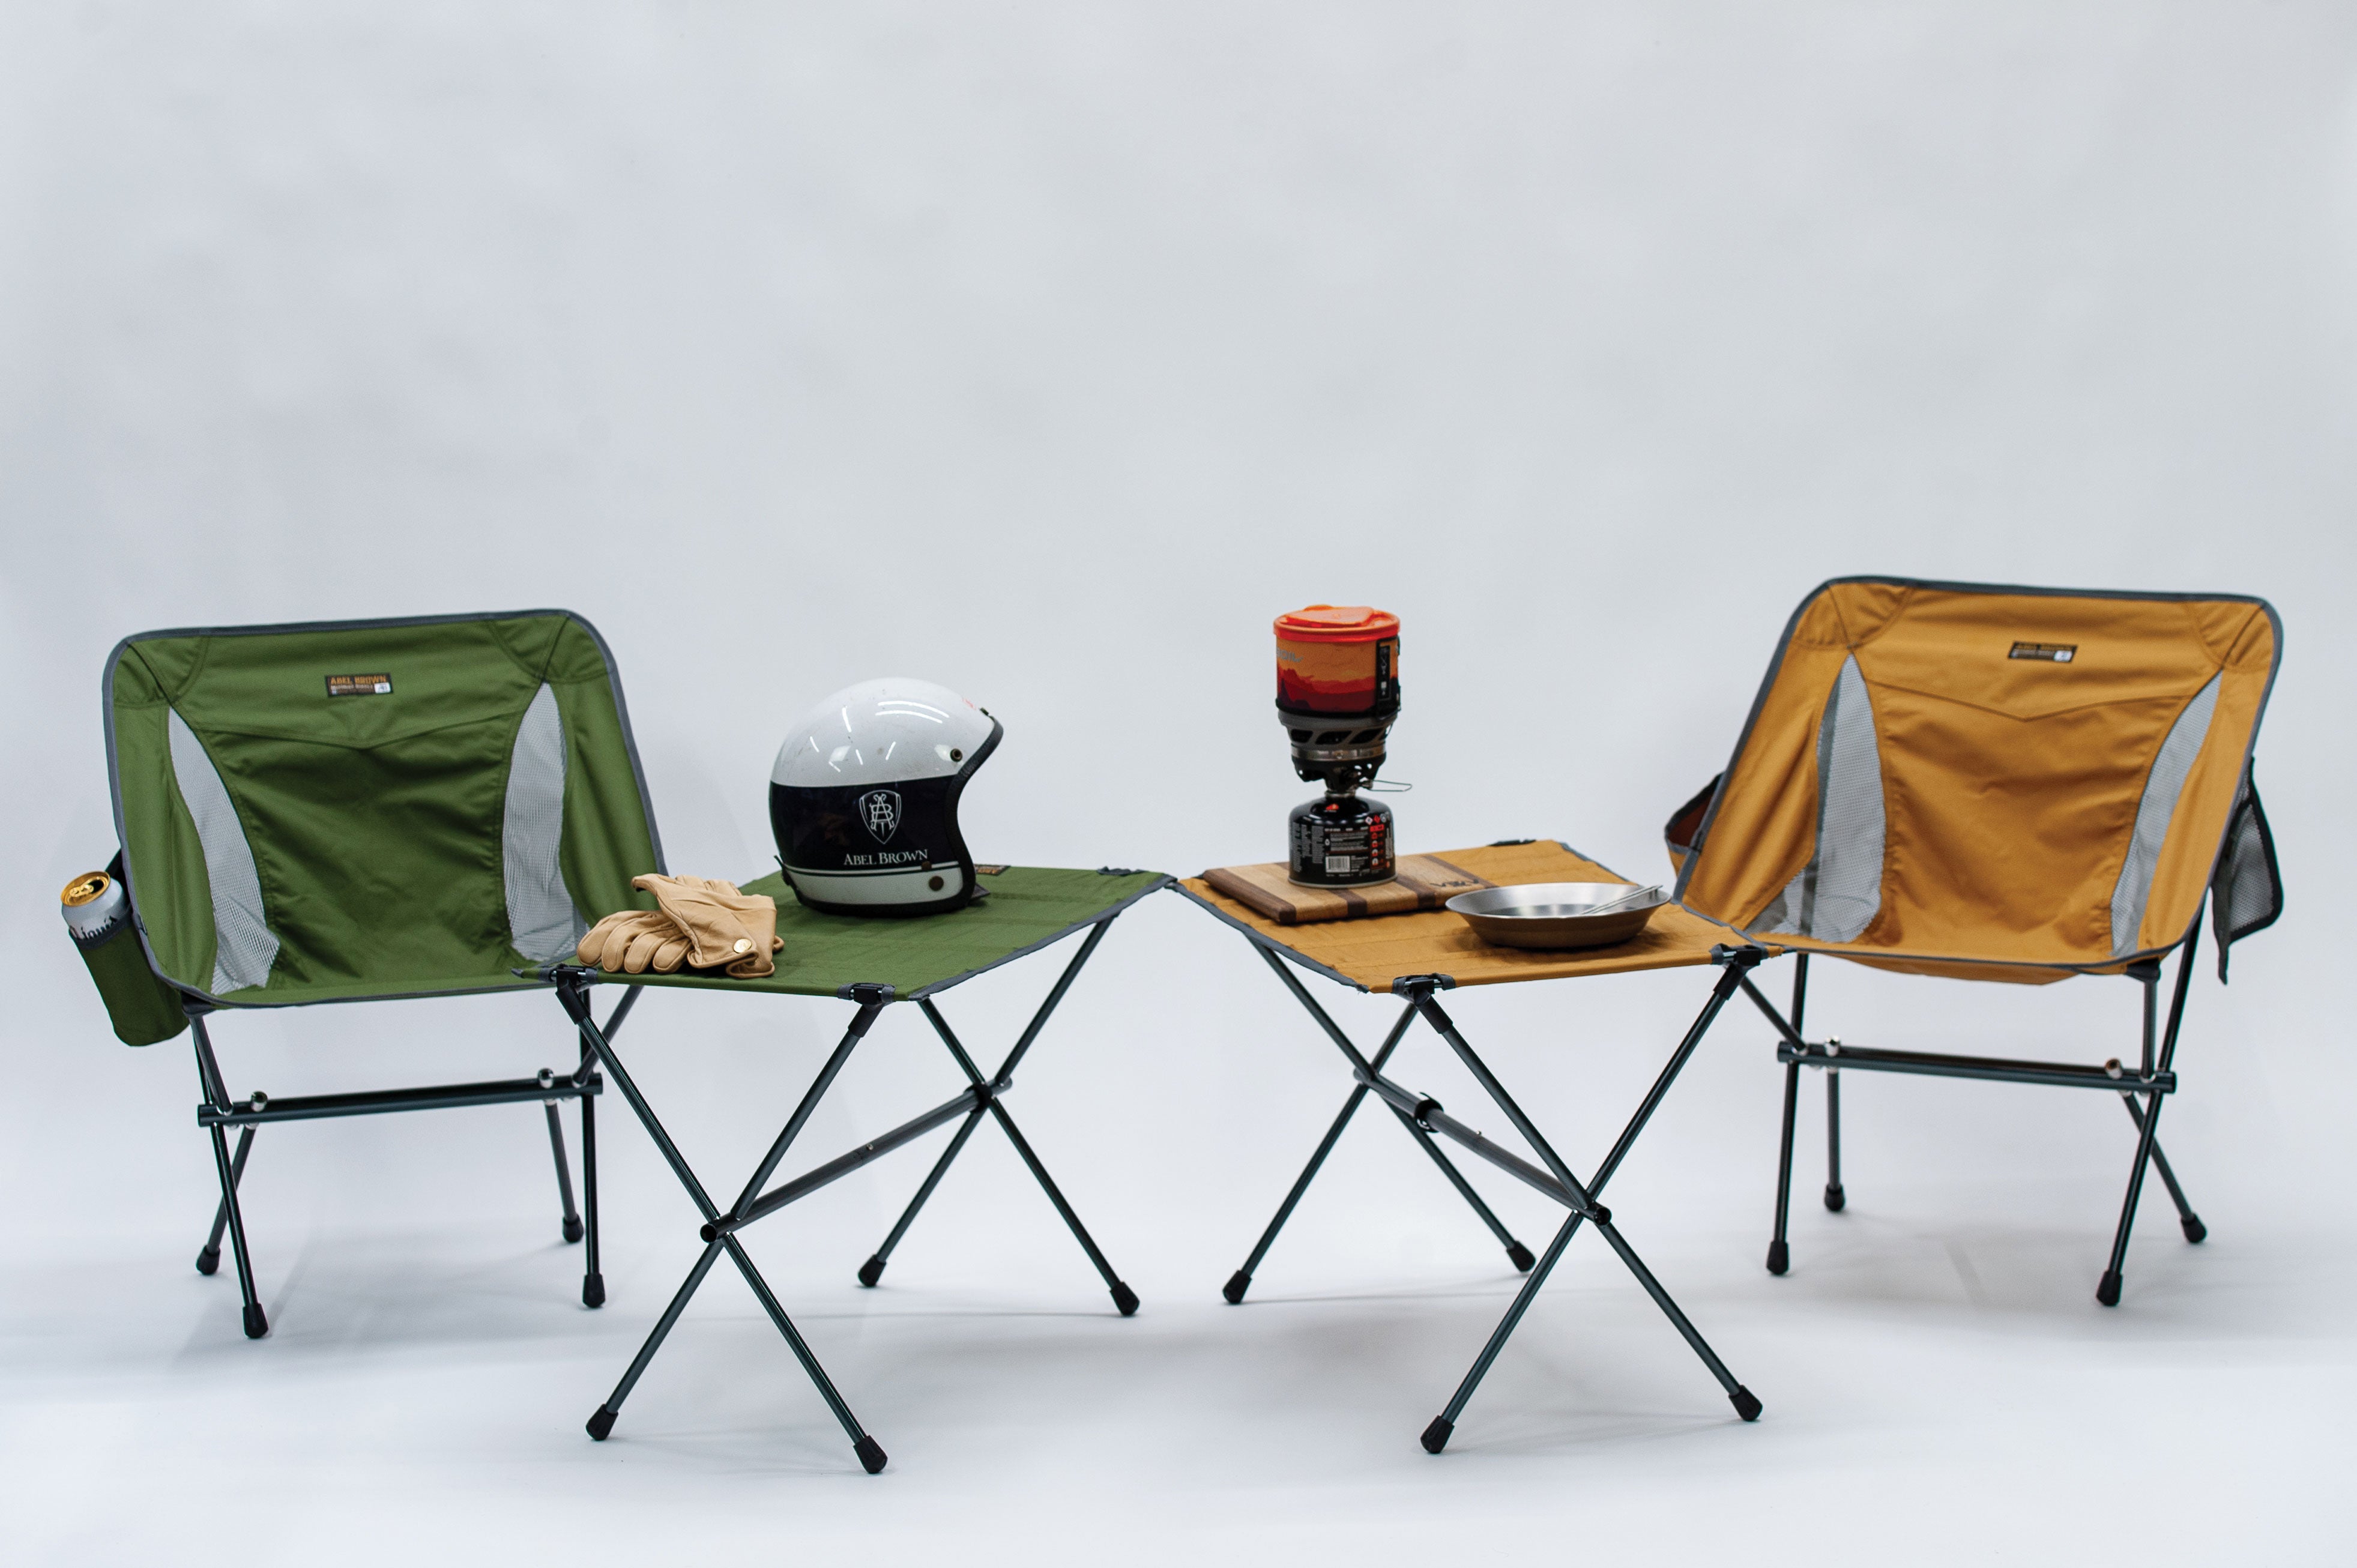 Nomad Camp Table